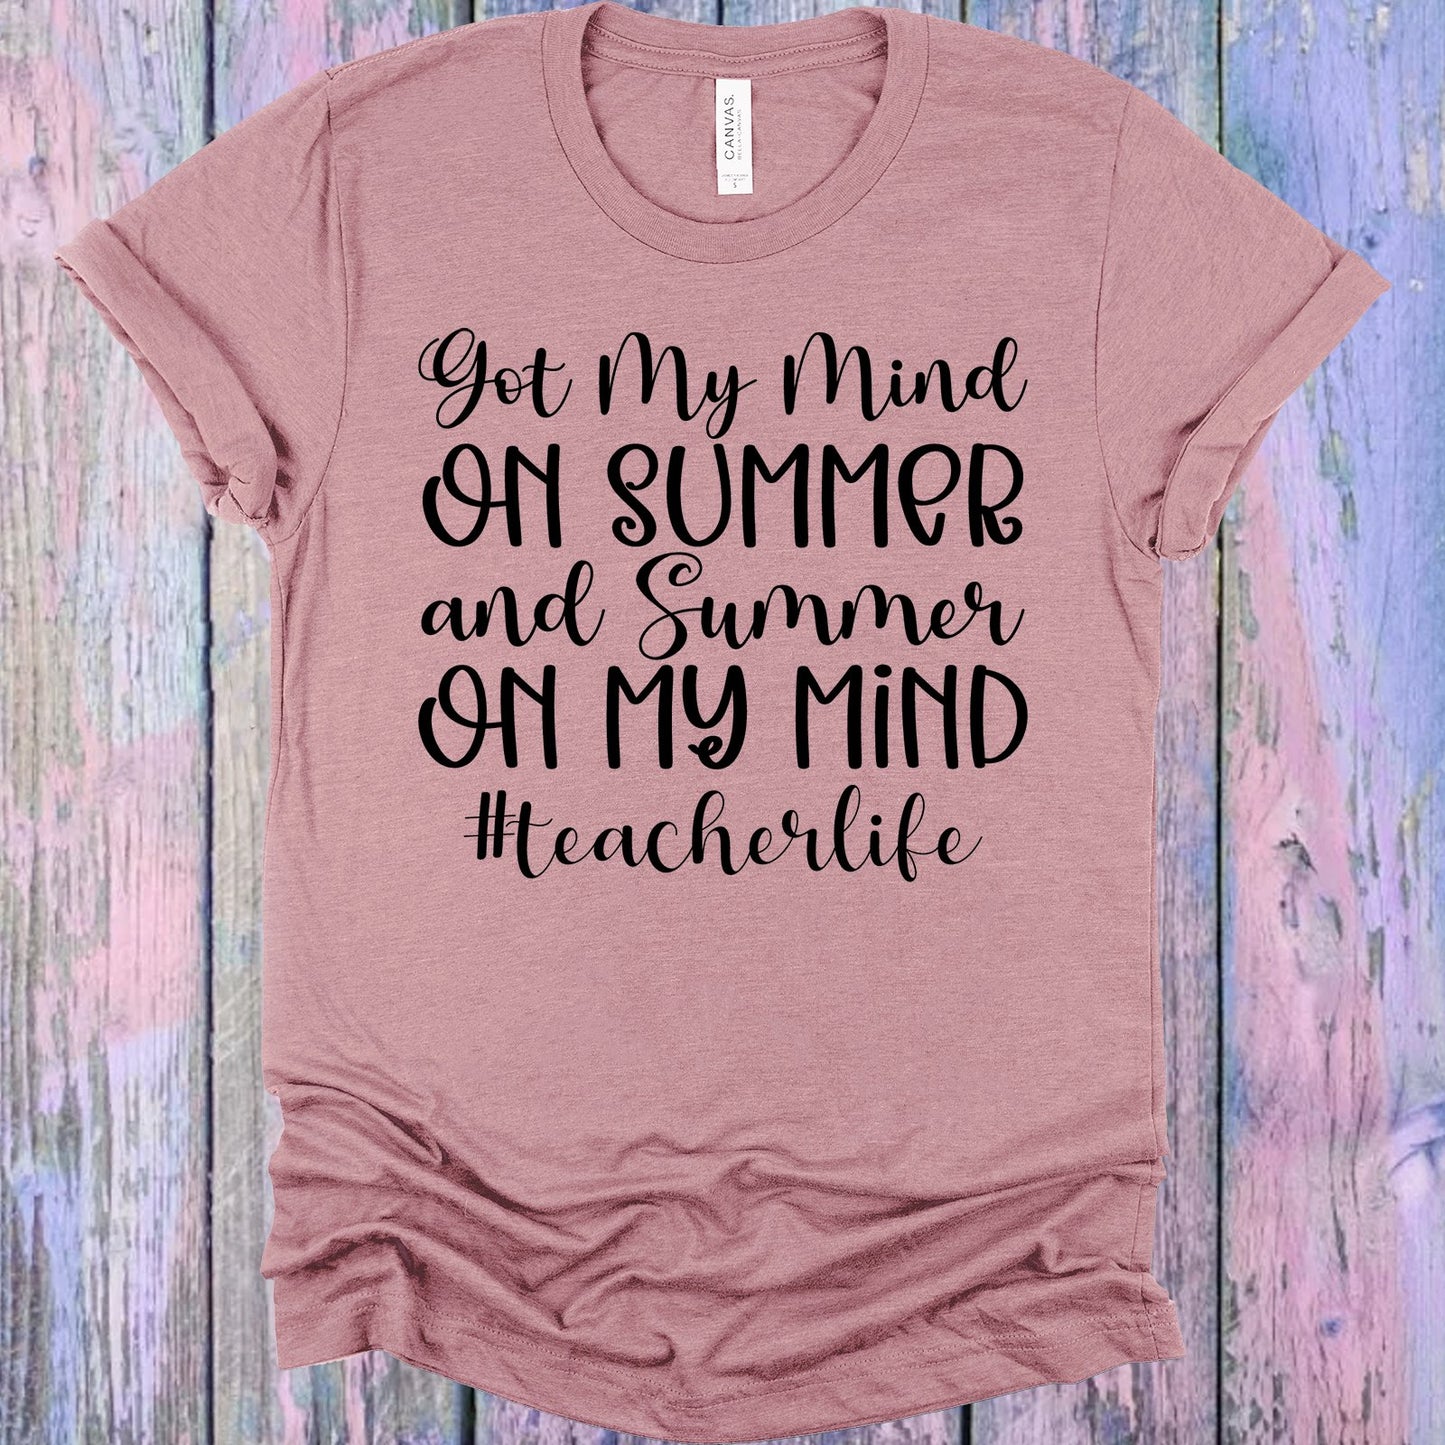 Got My Mind On Summer And Graphic Tee Graphic Tee